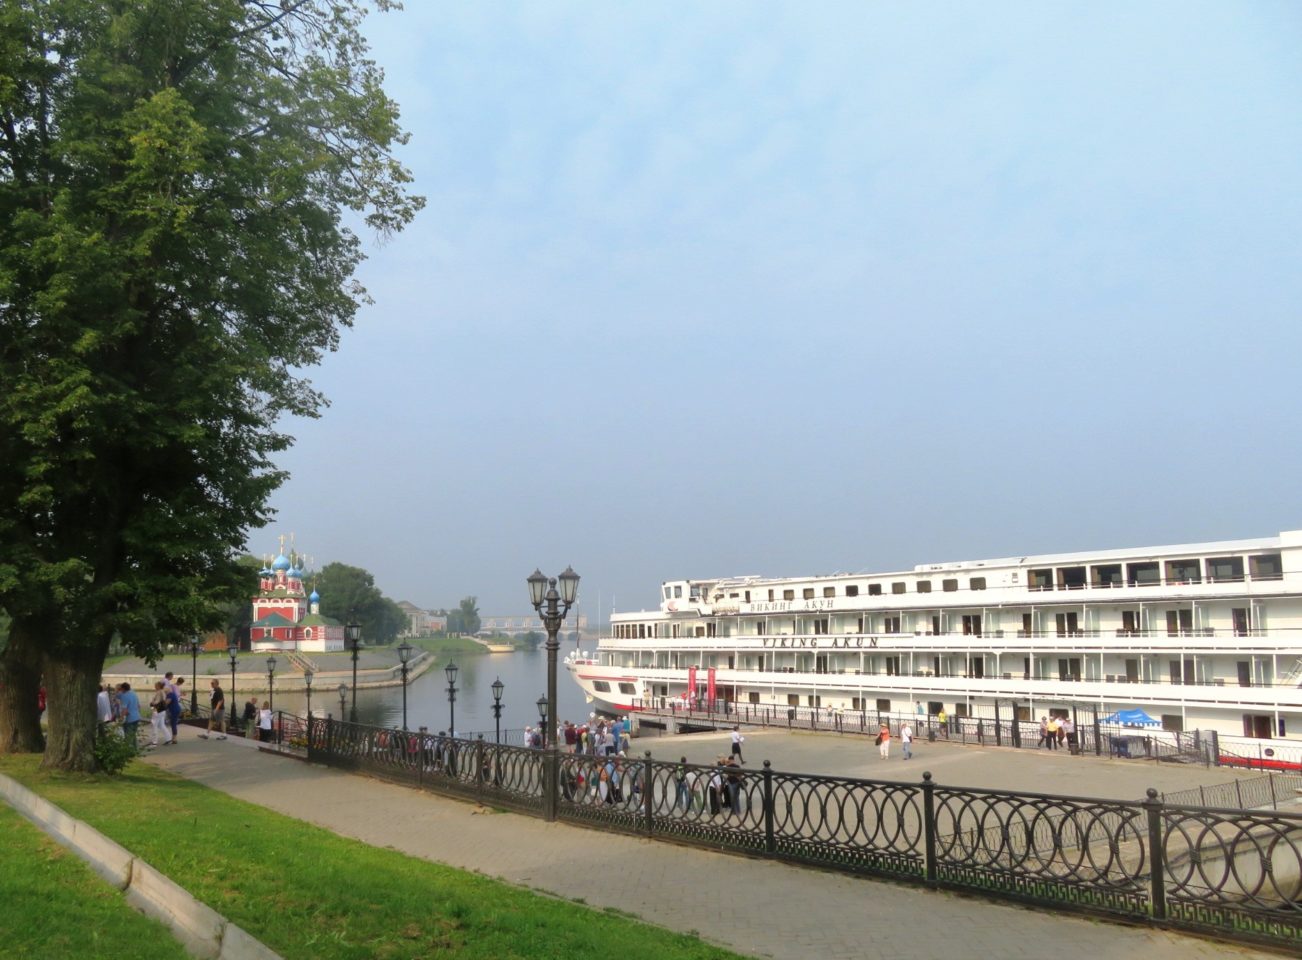 Viking Akun river cruise ship docked on the Volga River in Uglich, Russia